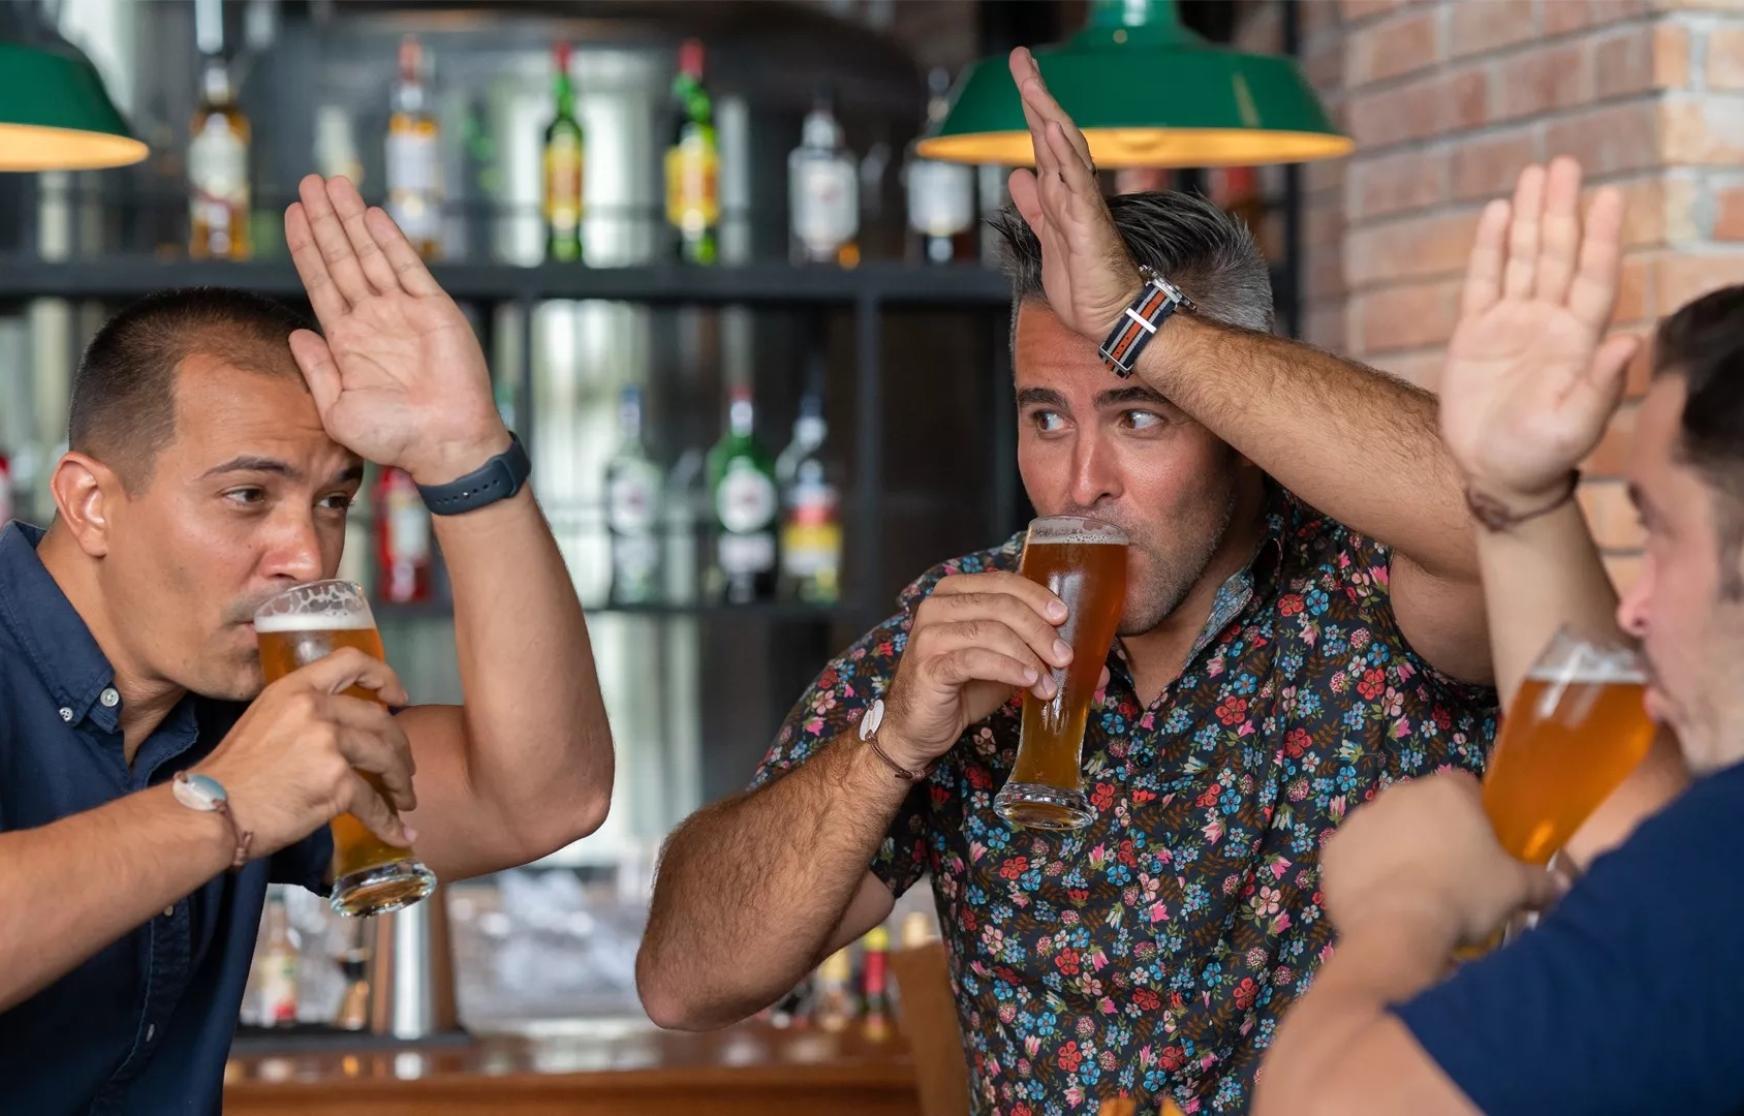 Three people drinking beers at a bar